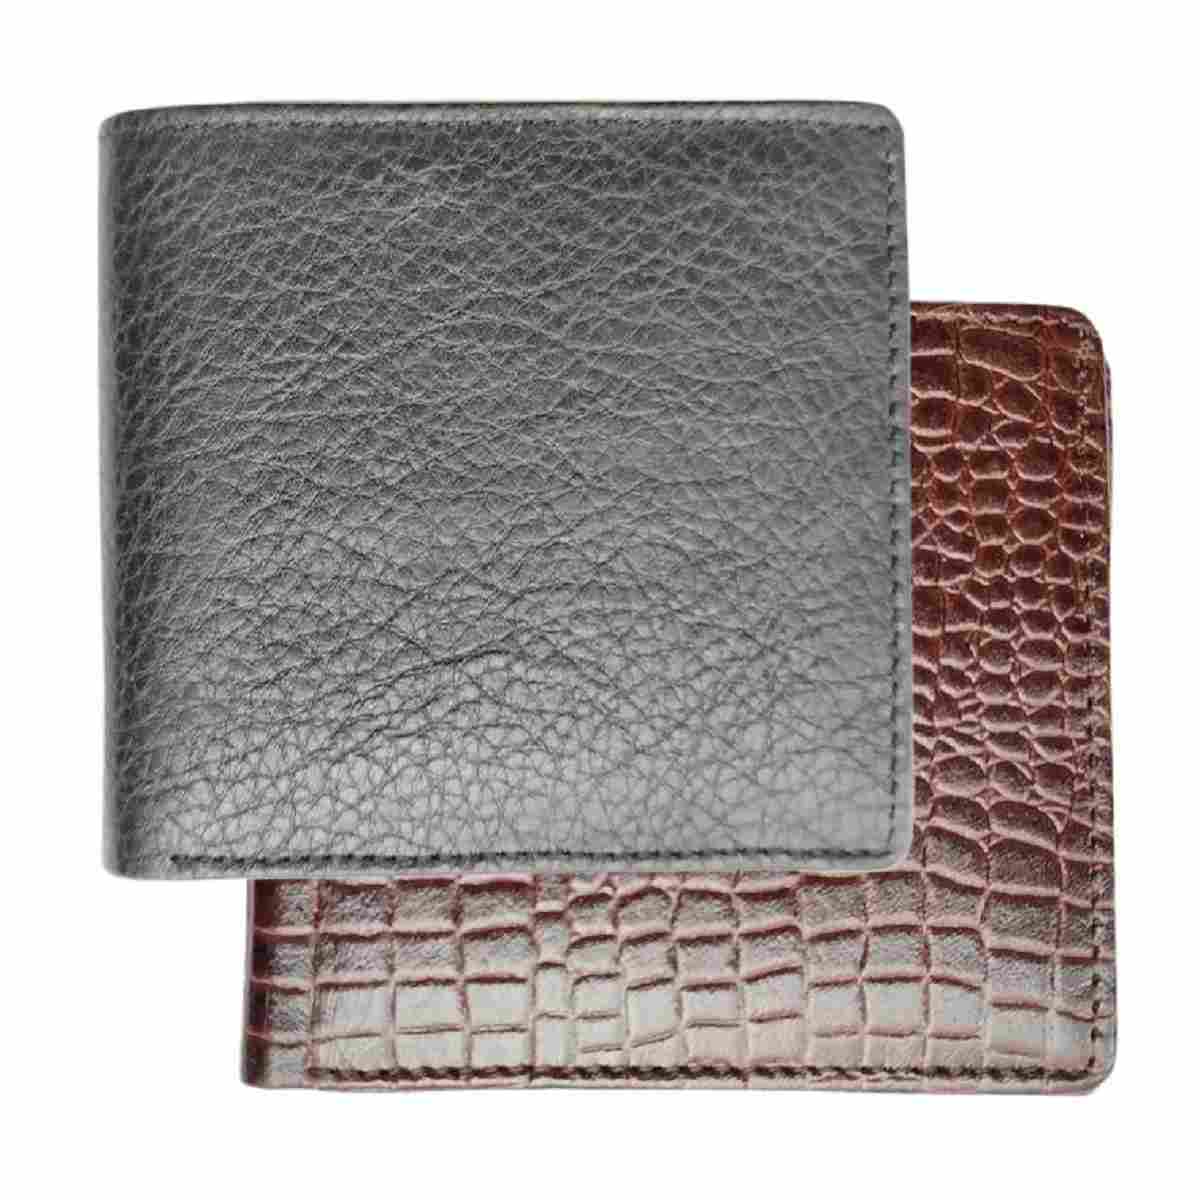 E2016 Genuine Leather Wallets for men Pack of 2